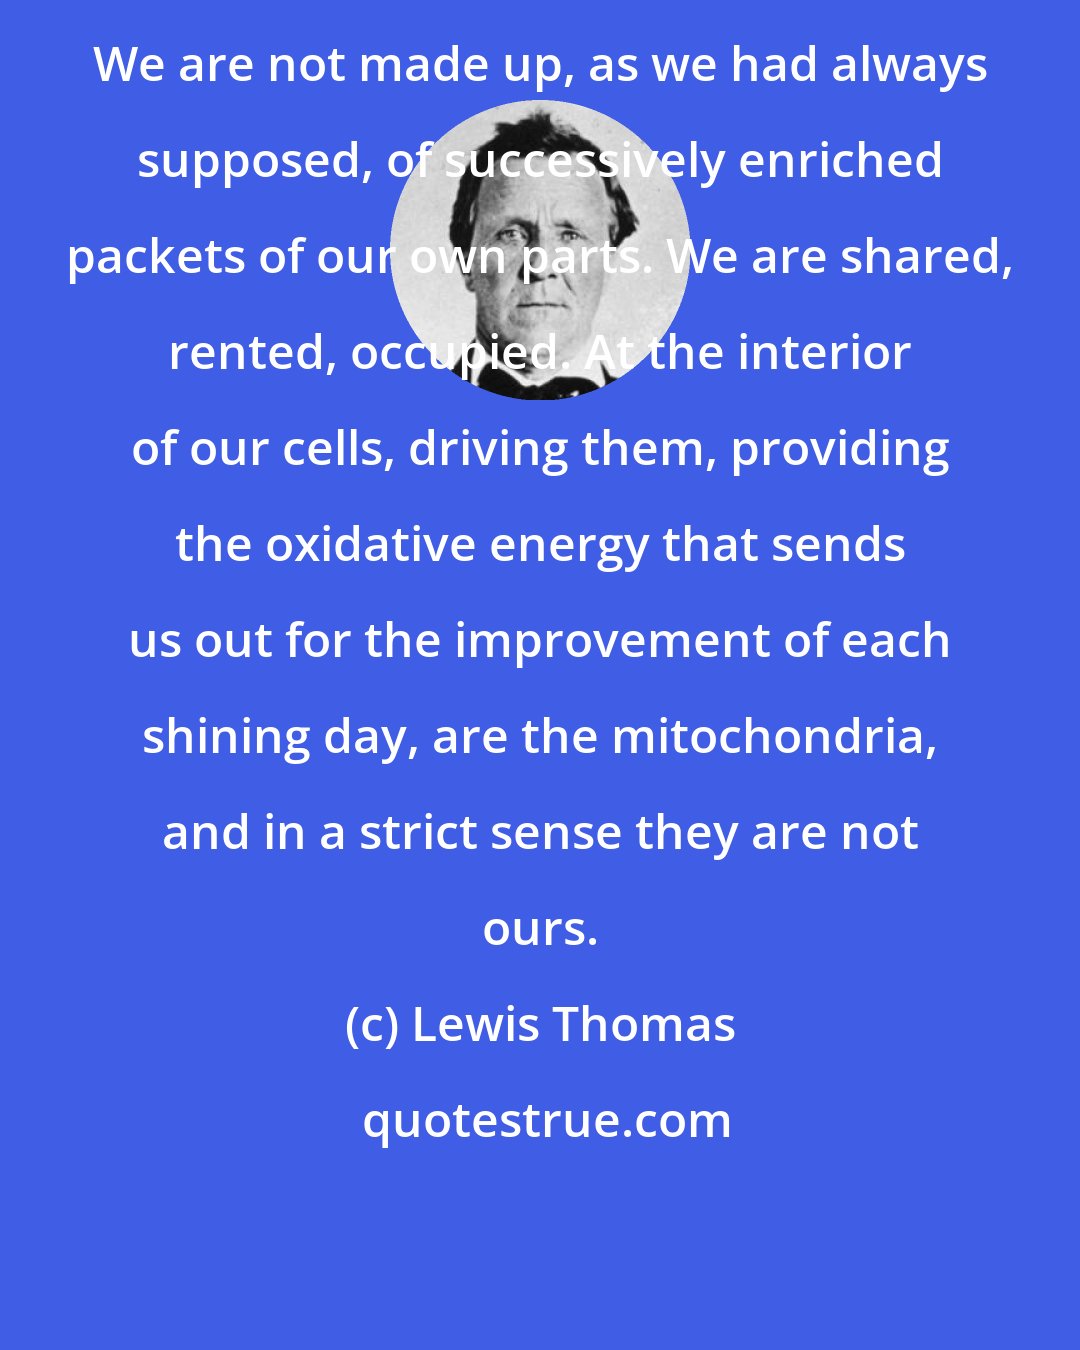 Lewis Thomas: We are not made up, as we had always supposed, of successively enriched packets of our own parts. We are shared, rented, occupied. At the interior of our cells, driving them, providing the oxidative energy that sends us out for the improvement of each shining day, are the mitochondria, and in a strict sense they are not ours.